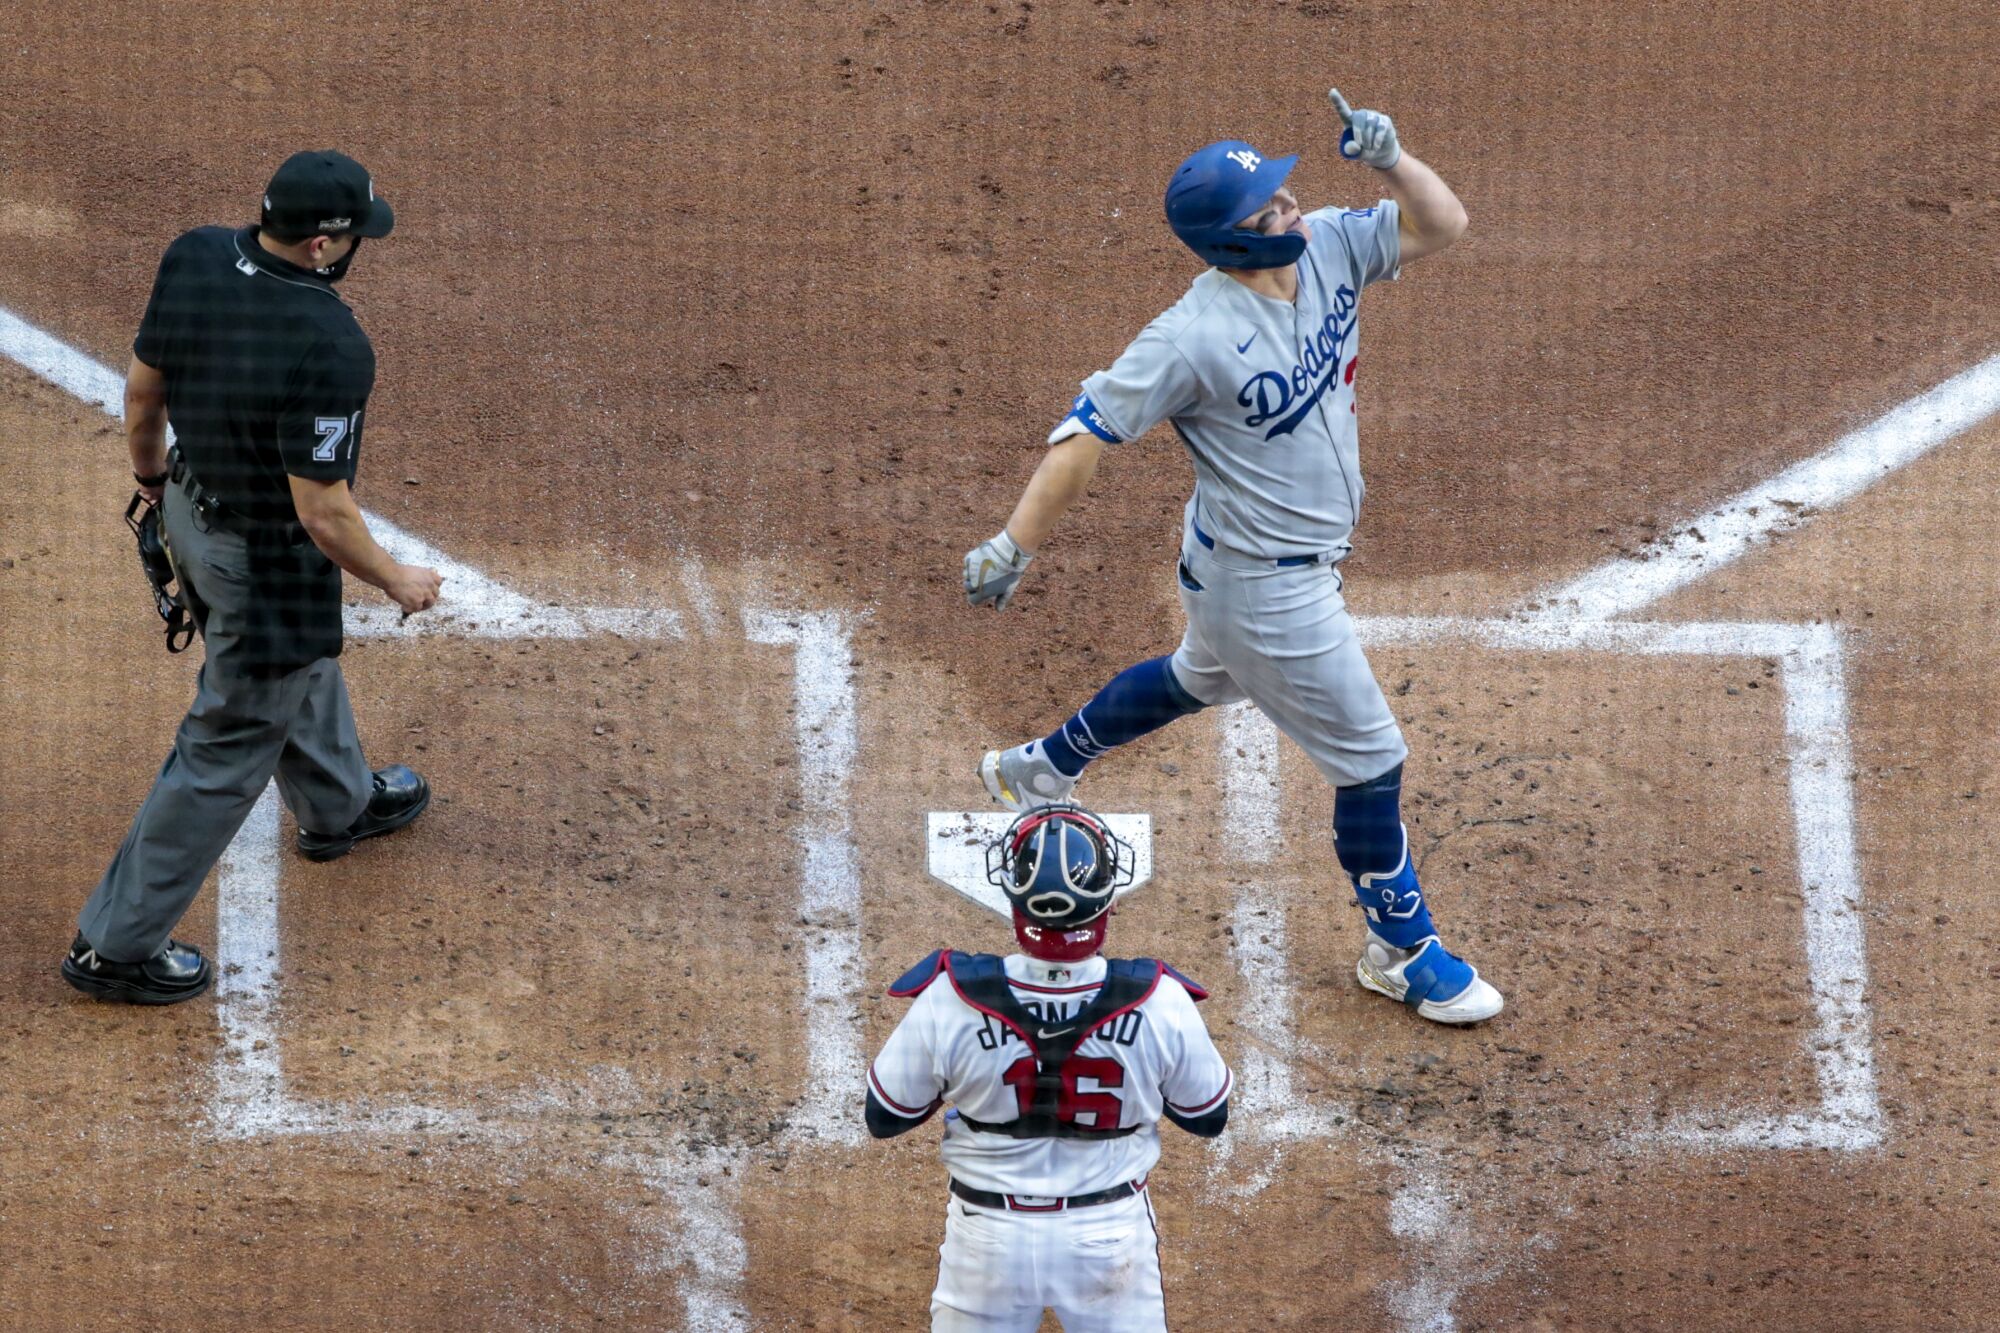 Dodgers left fielder Joc Pederson celebrates as he crosses the plate after hitting a three-run home run in the first inning.